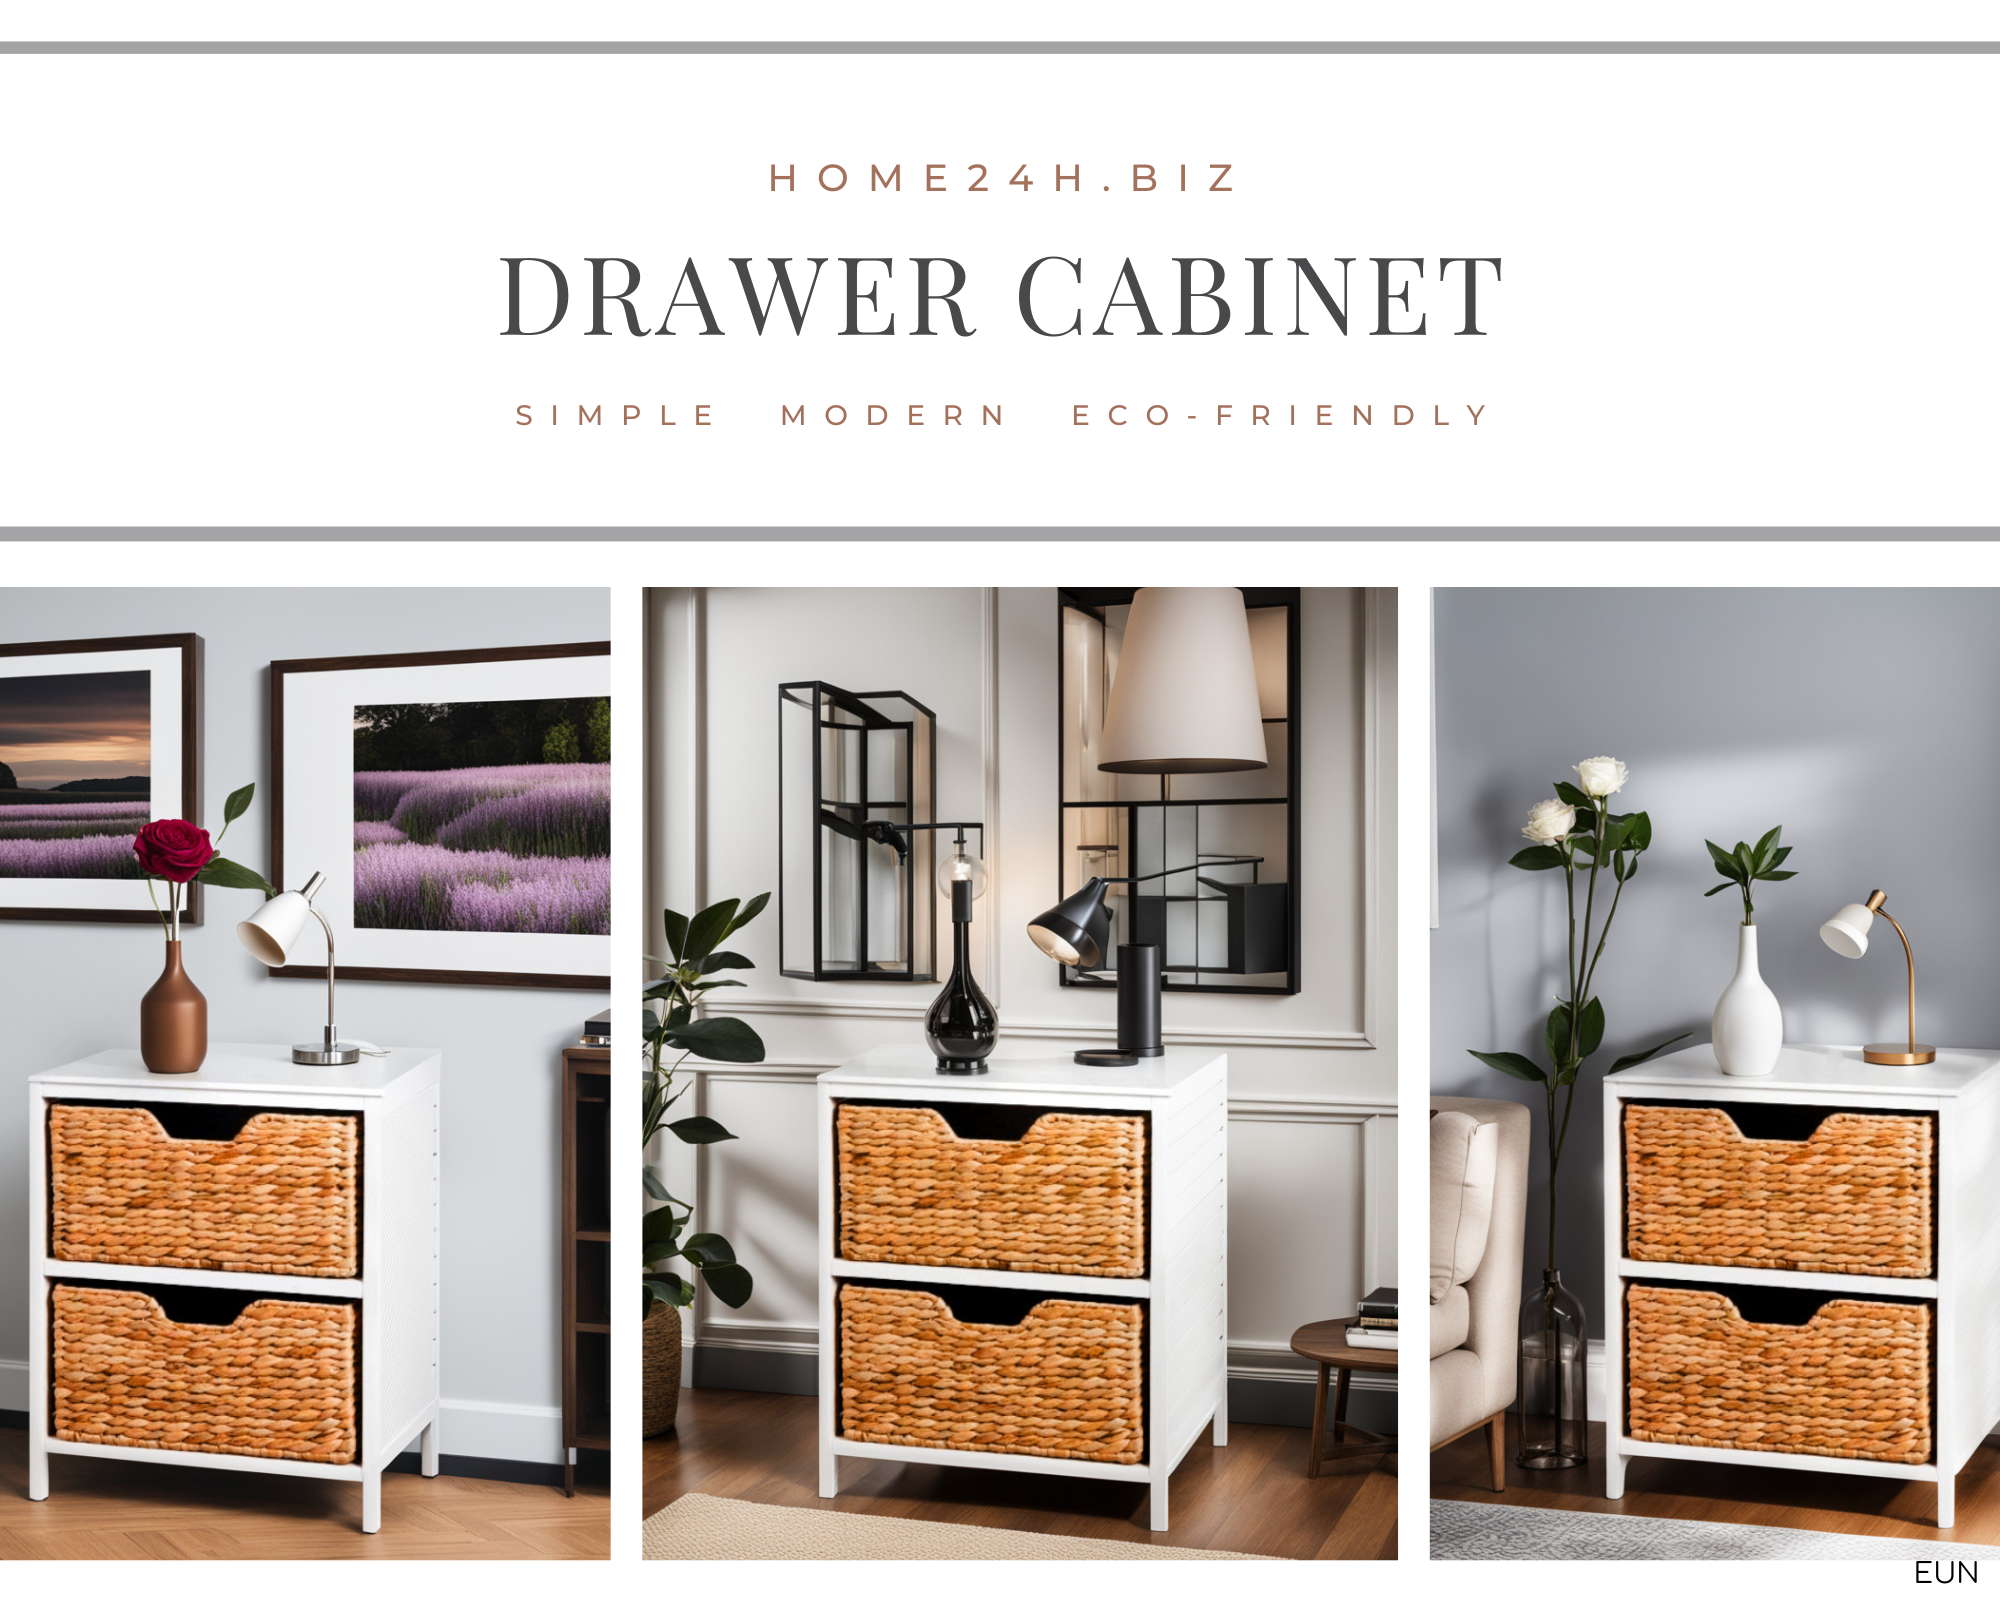 The Drawer Cabinet Is Crafted From Water Hyacinth Simple Modern And Eco Friendly